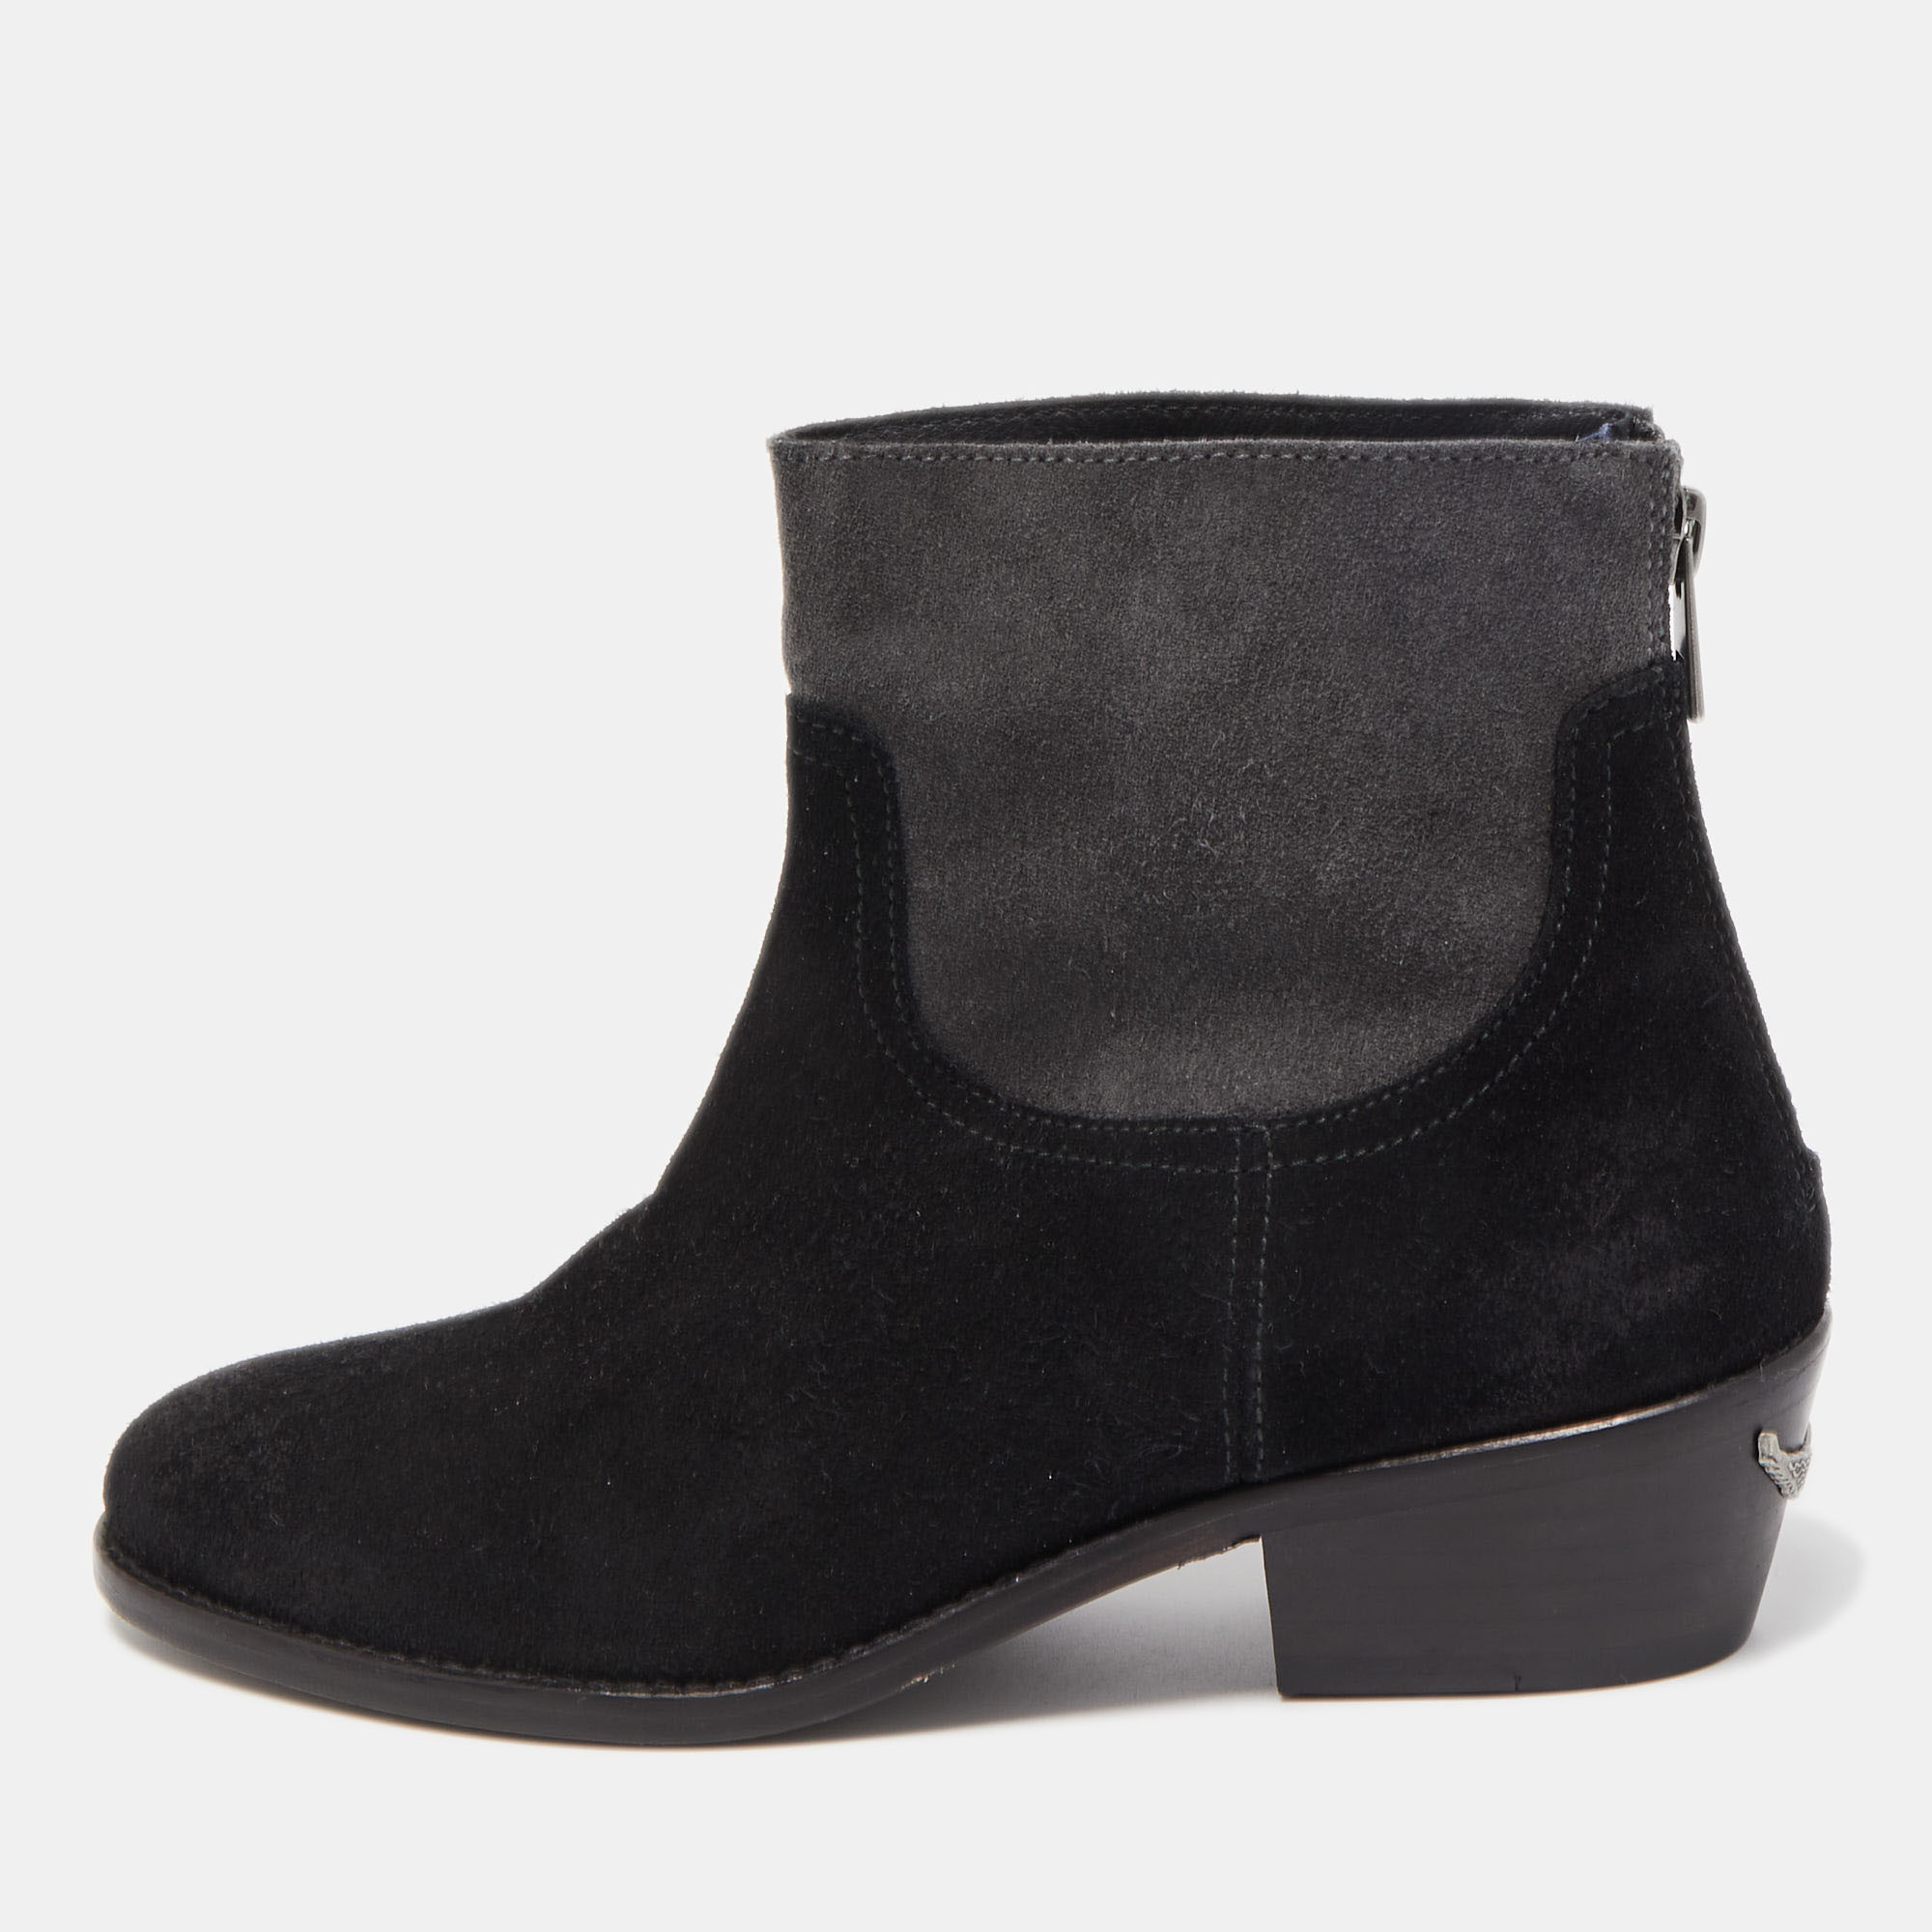 Pre-owned Zadig & Voltaire Black Suede Ankle Boots Size 36